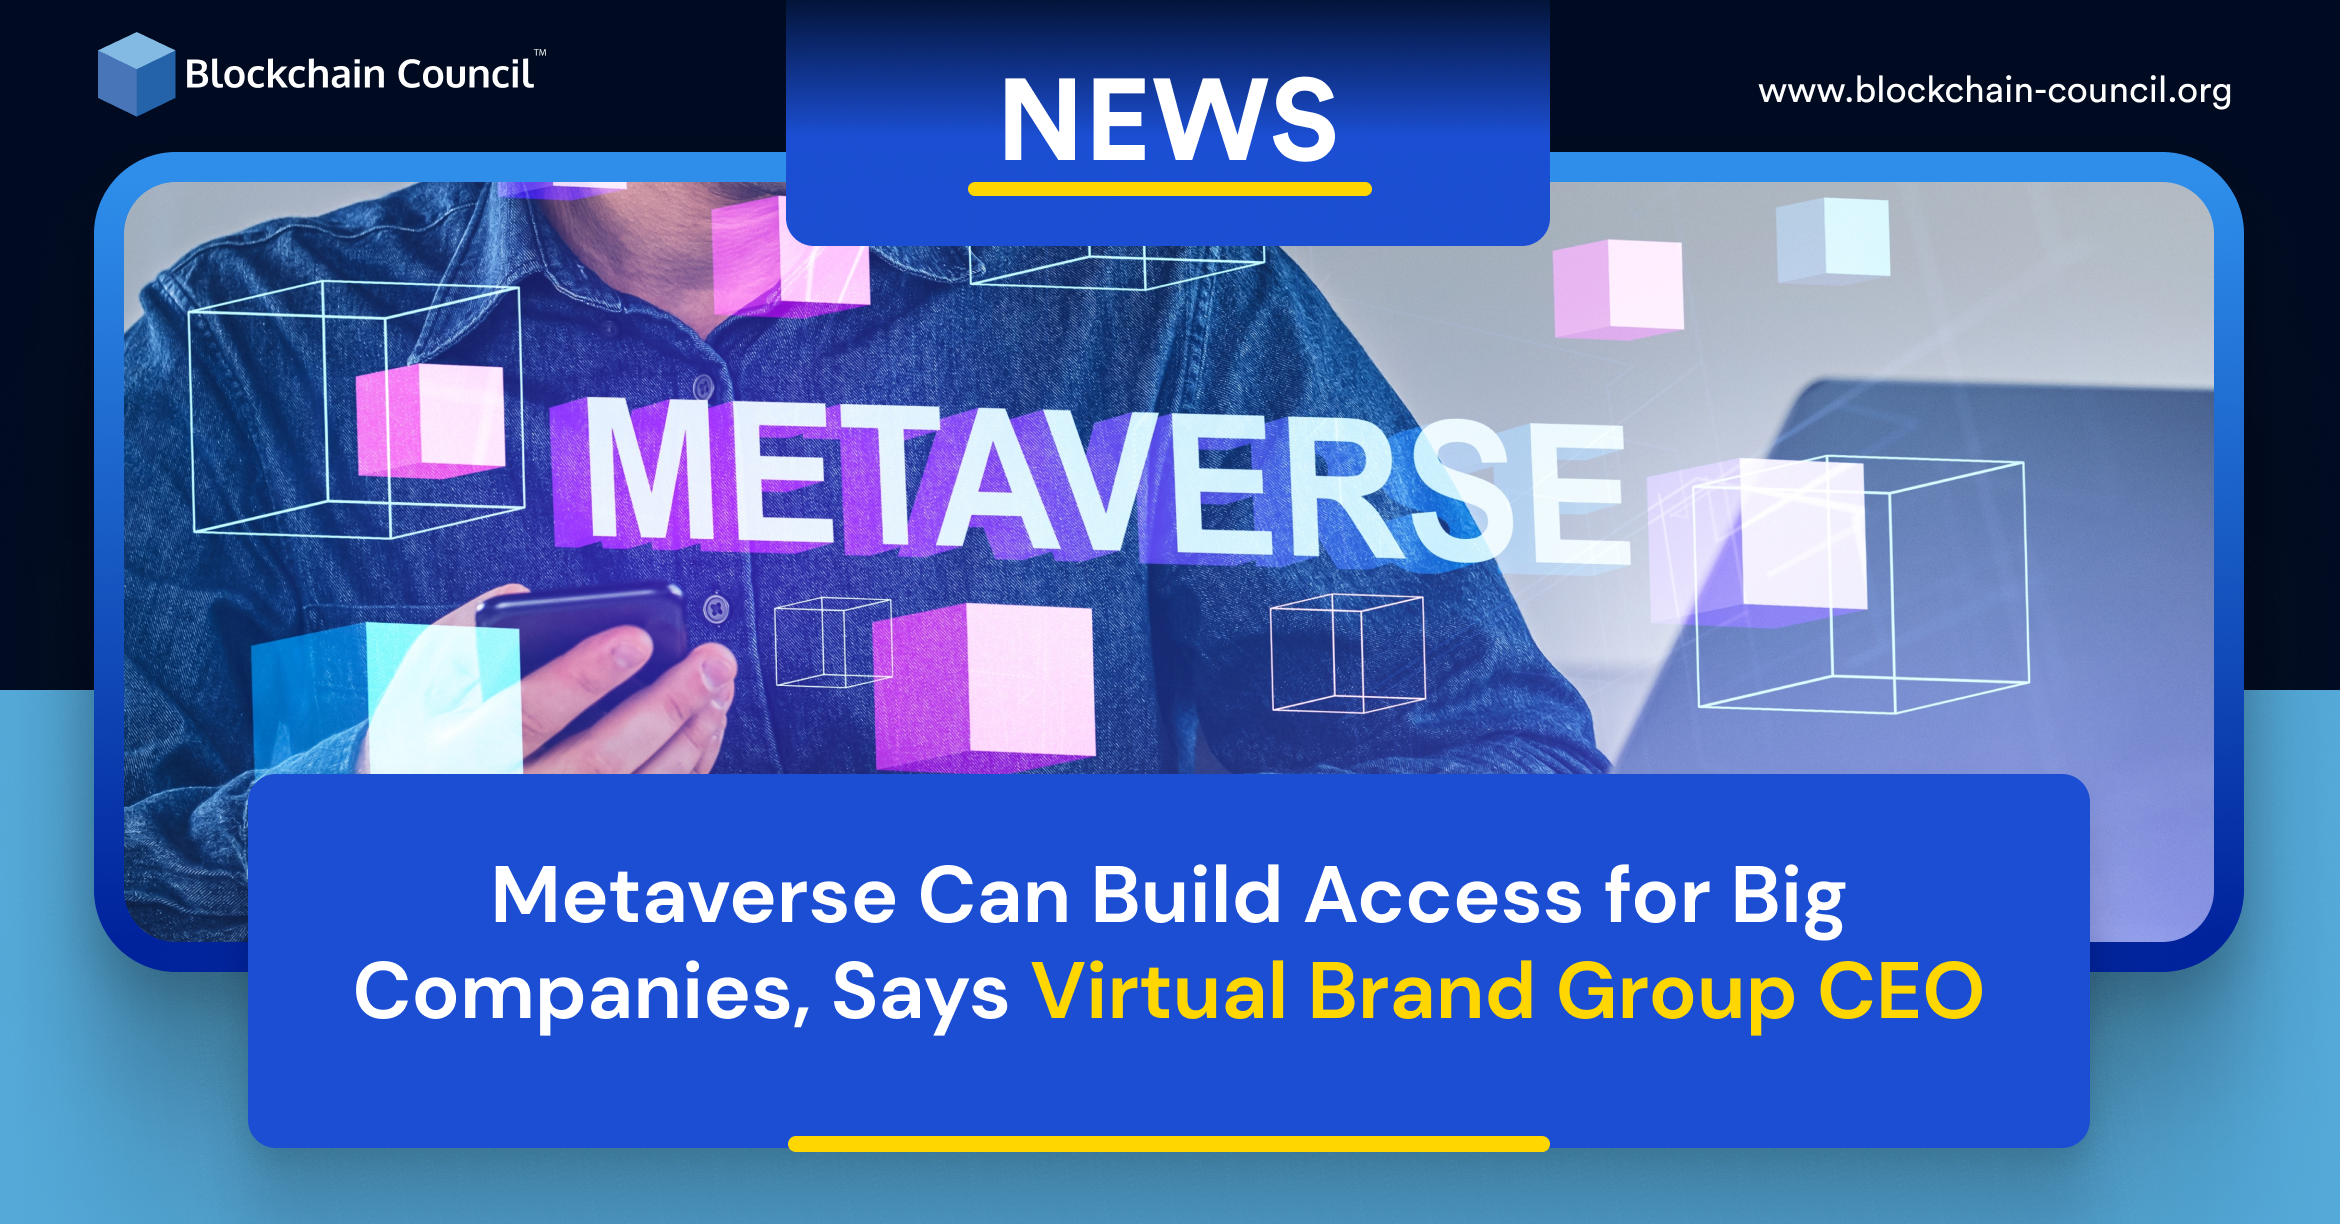 Metaverse Can Build Access for Big Companies, Says Virtual Brand Group CEO